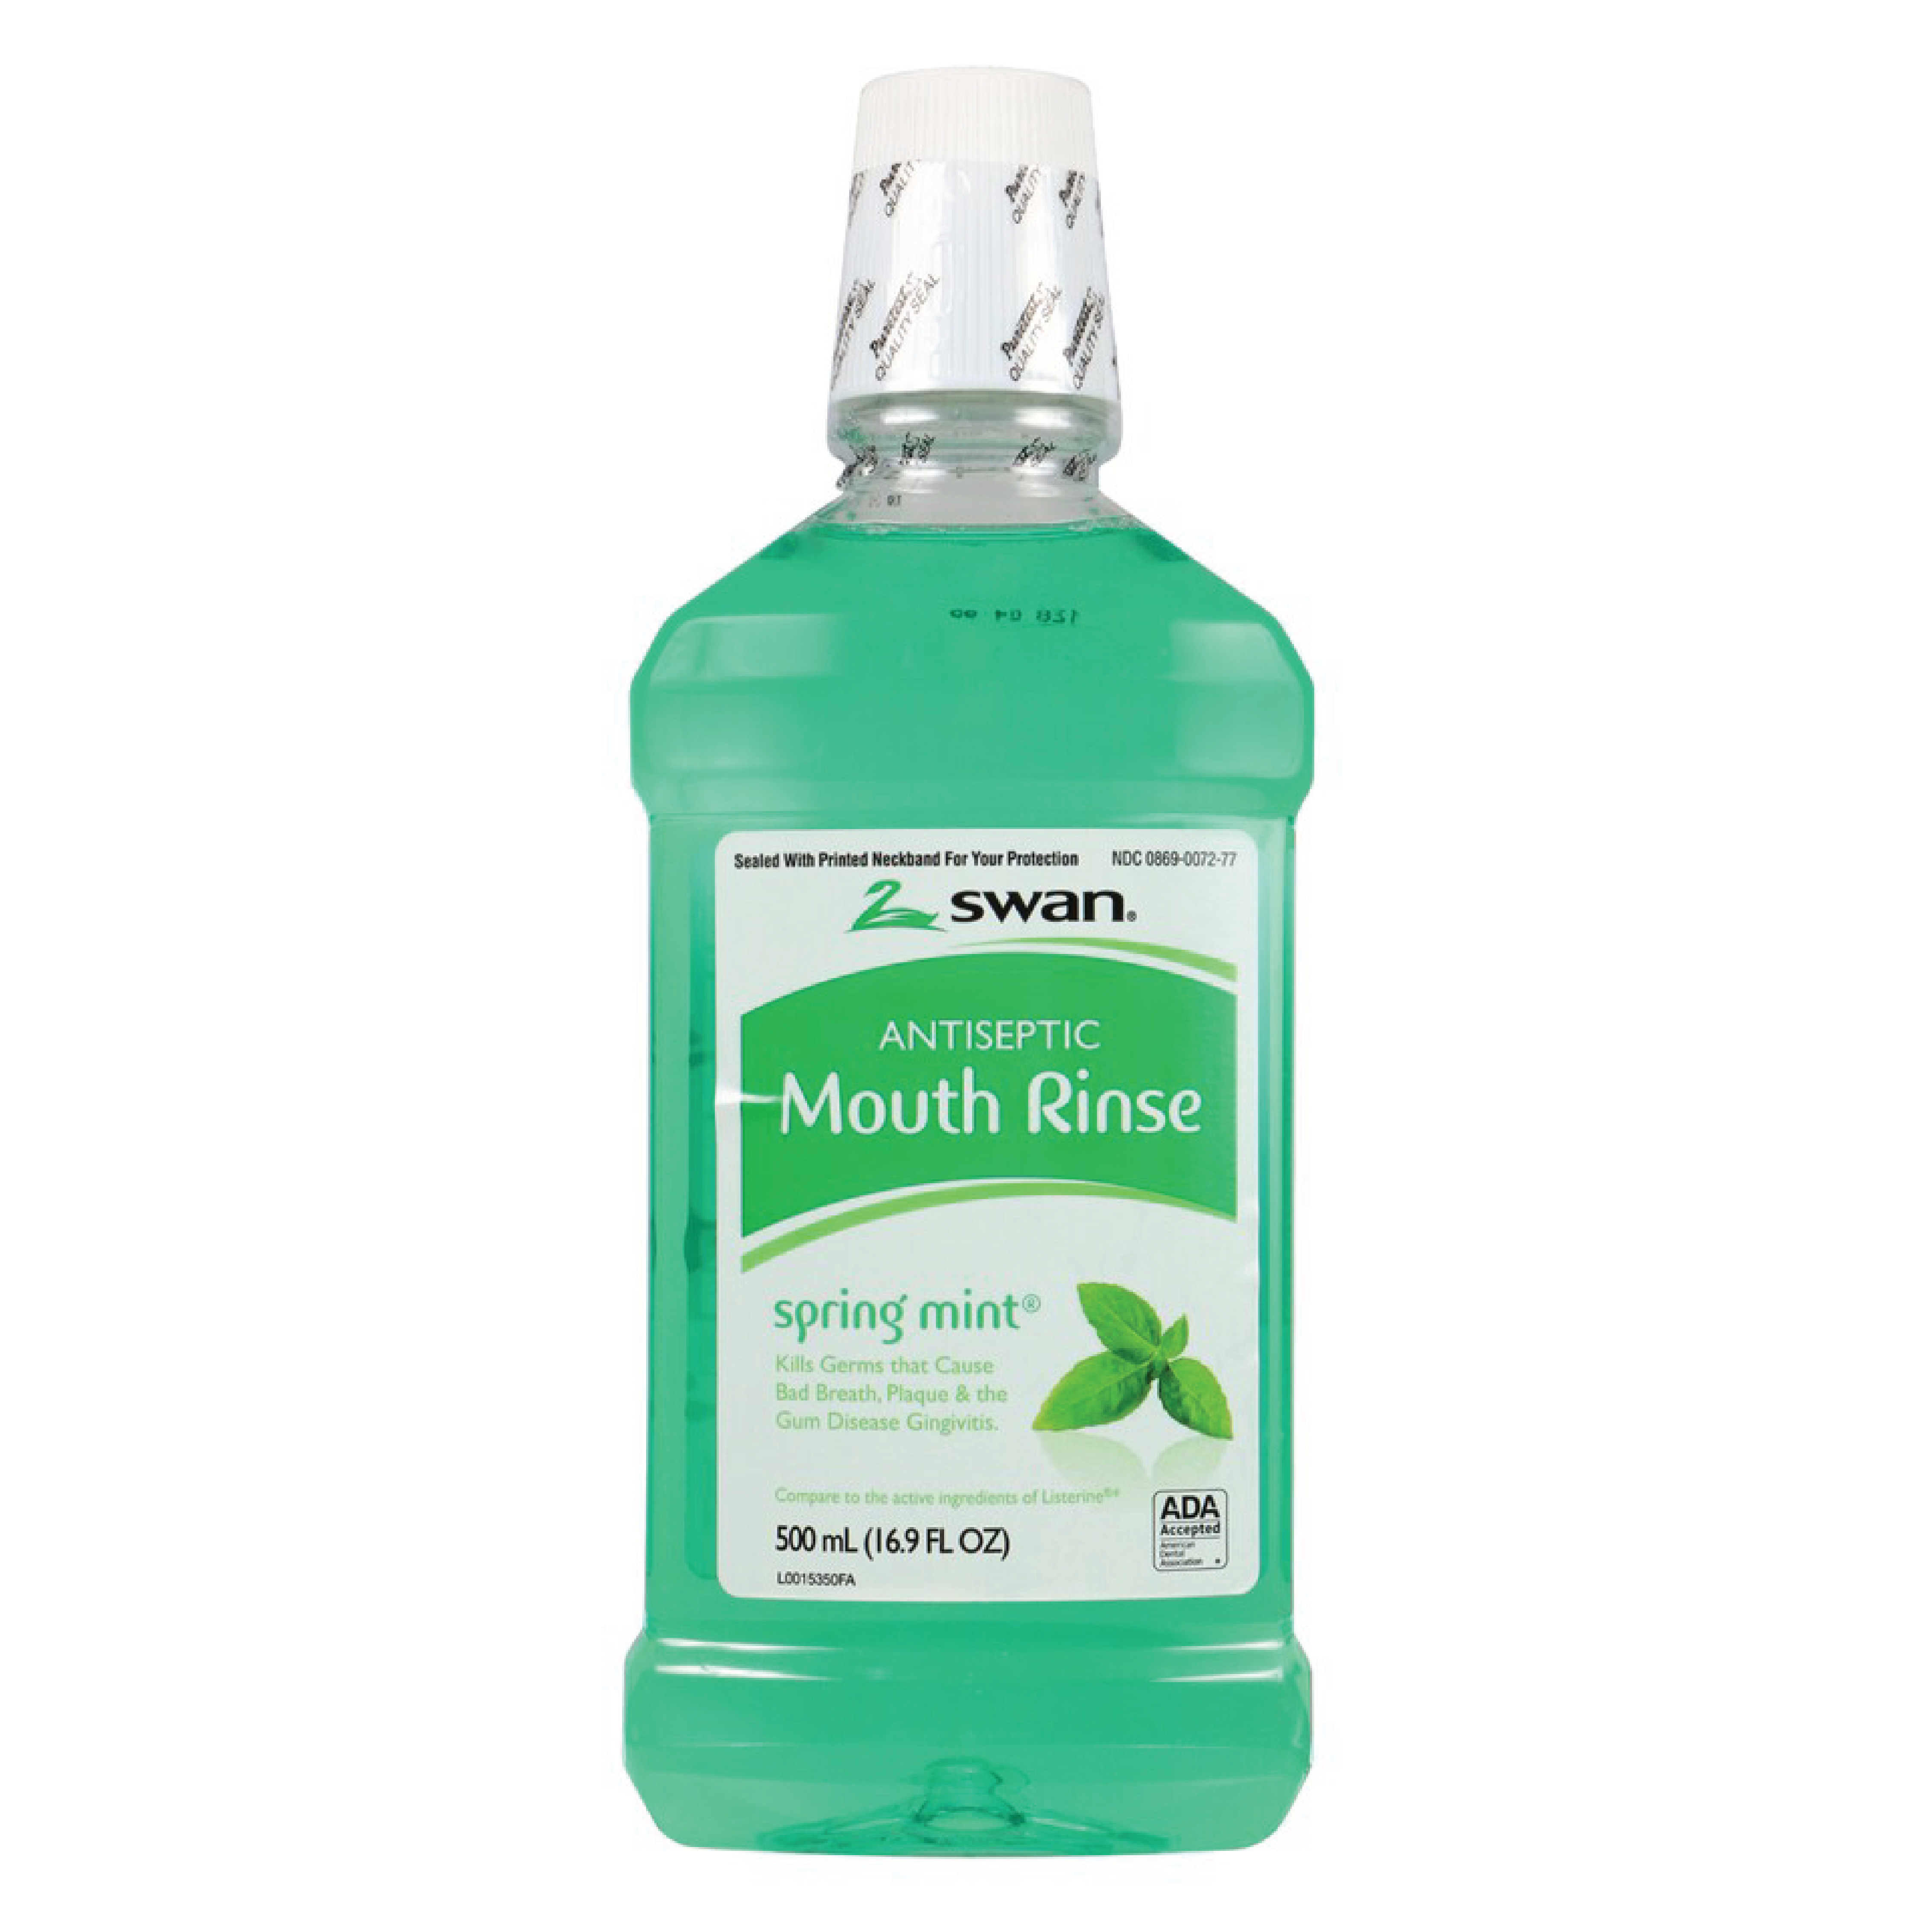 Swan Spring Mint Antiseptic Mouth Rinse 16.9oz